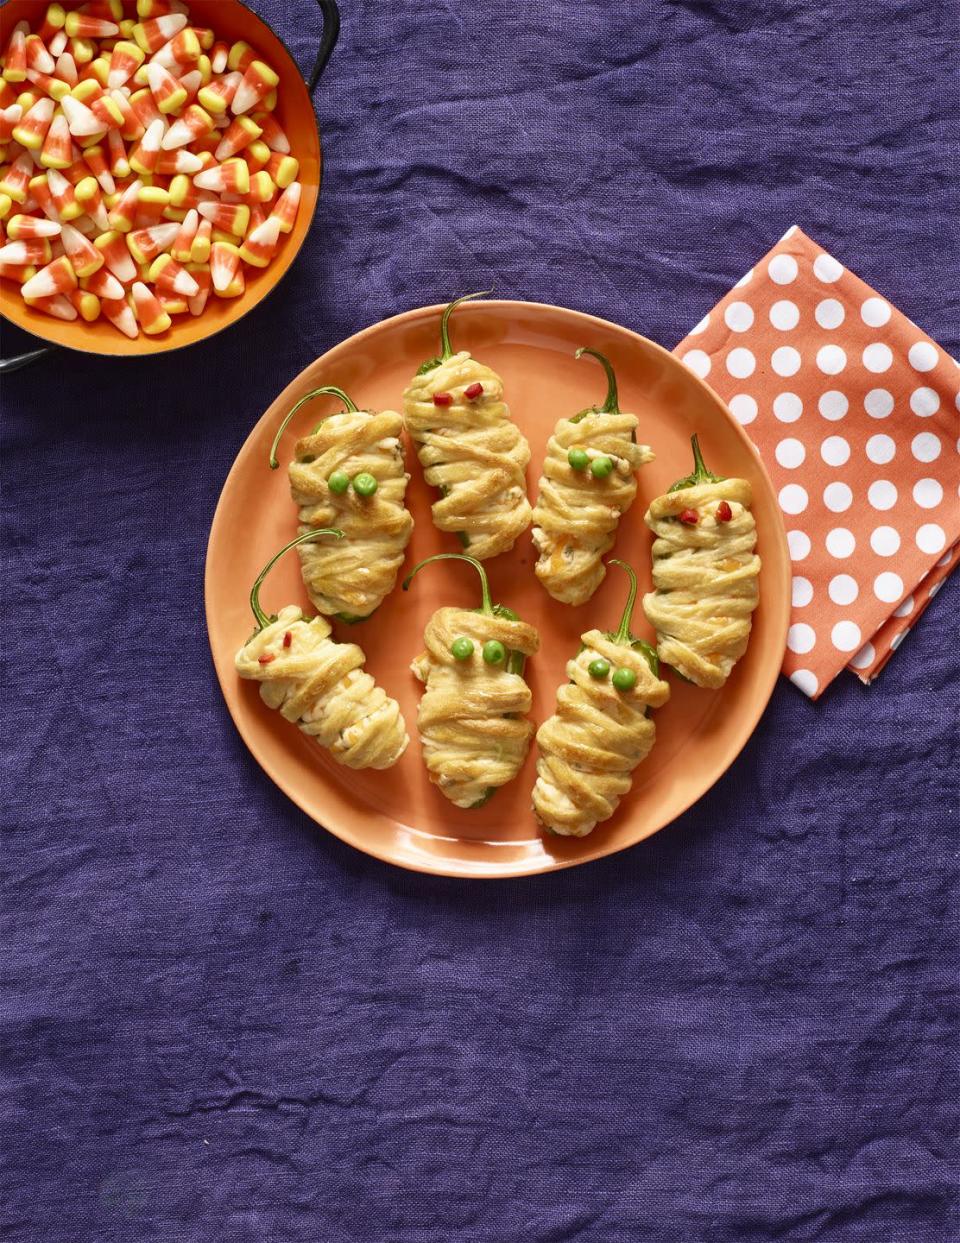 <p>To make this recipe, wrap jalapeño poppers with puff pastry and add roasted red pepper for eyes.</p><p>Get the <a href="https://www.womansday.com/food-recipes/food-drinks/recipes/a56191/hot-pepper-mummies-recipe/" rel="nofollow noopener" target="_blank" data-ylk="slk:Hot Pepper Mummies recipe" class="link "><strong>Hot Pepper Mummies recipe</strong></a>.</p><p><a class="link " href="https://www.amazon.com/Franks-RedHot-Original-Cayenne-Pepper/dp/B000XGGX6G?tag=syn-yahoo-20&ascsubtag=%5Bartid%7C10070.g.2574%5Bsrc%7Cyahoo-us" rel="nofollow noopener" target="_blank" data-ylk="slk:Shop Hot Sauce">Shop Hot Sauce</a></p>